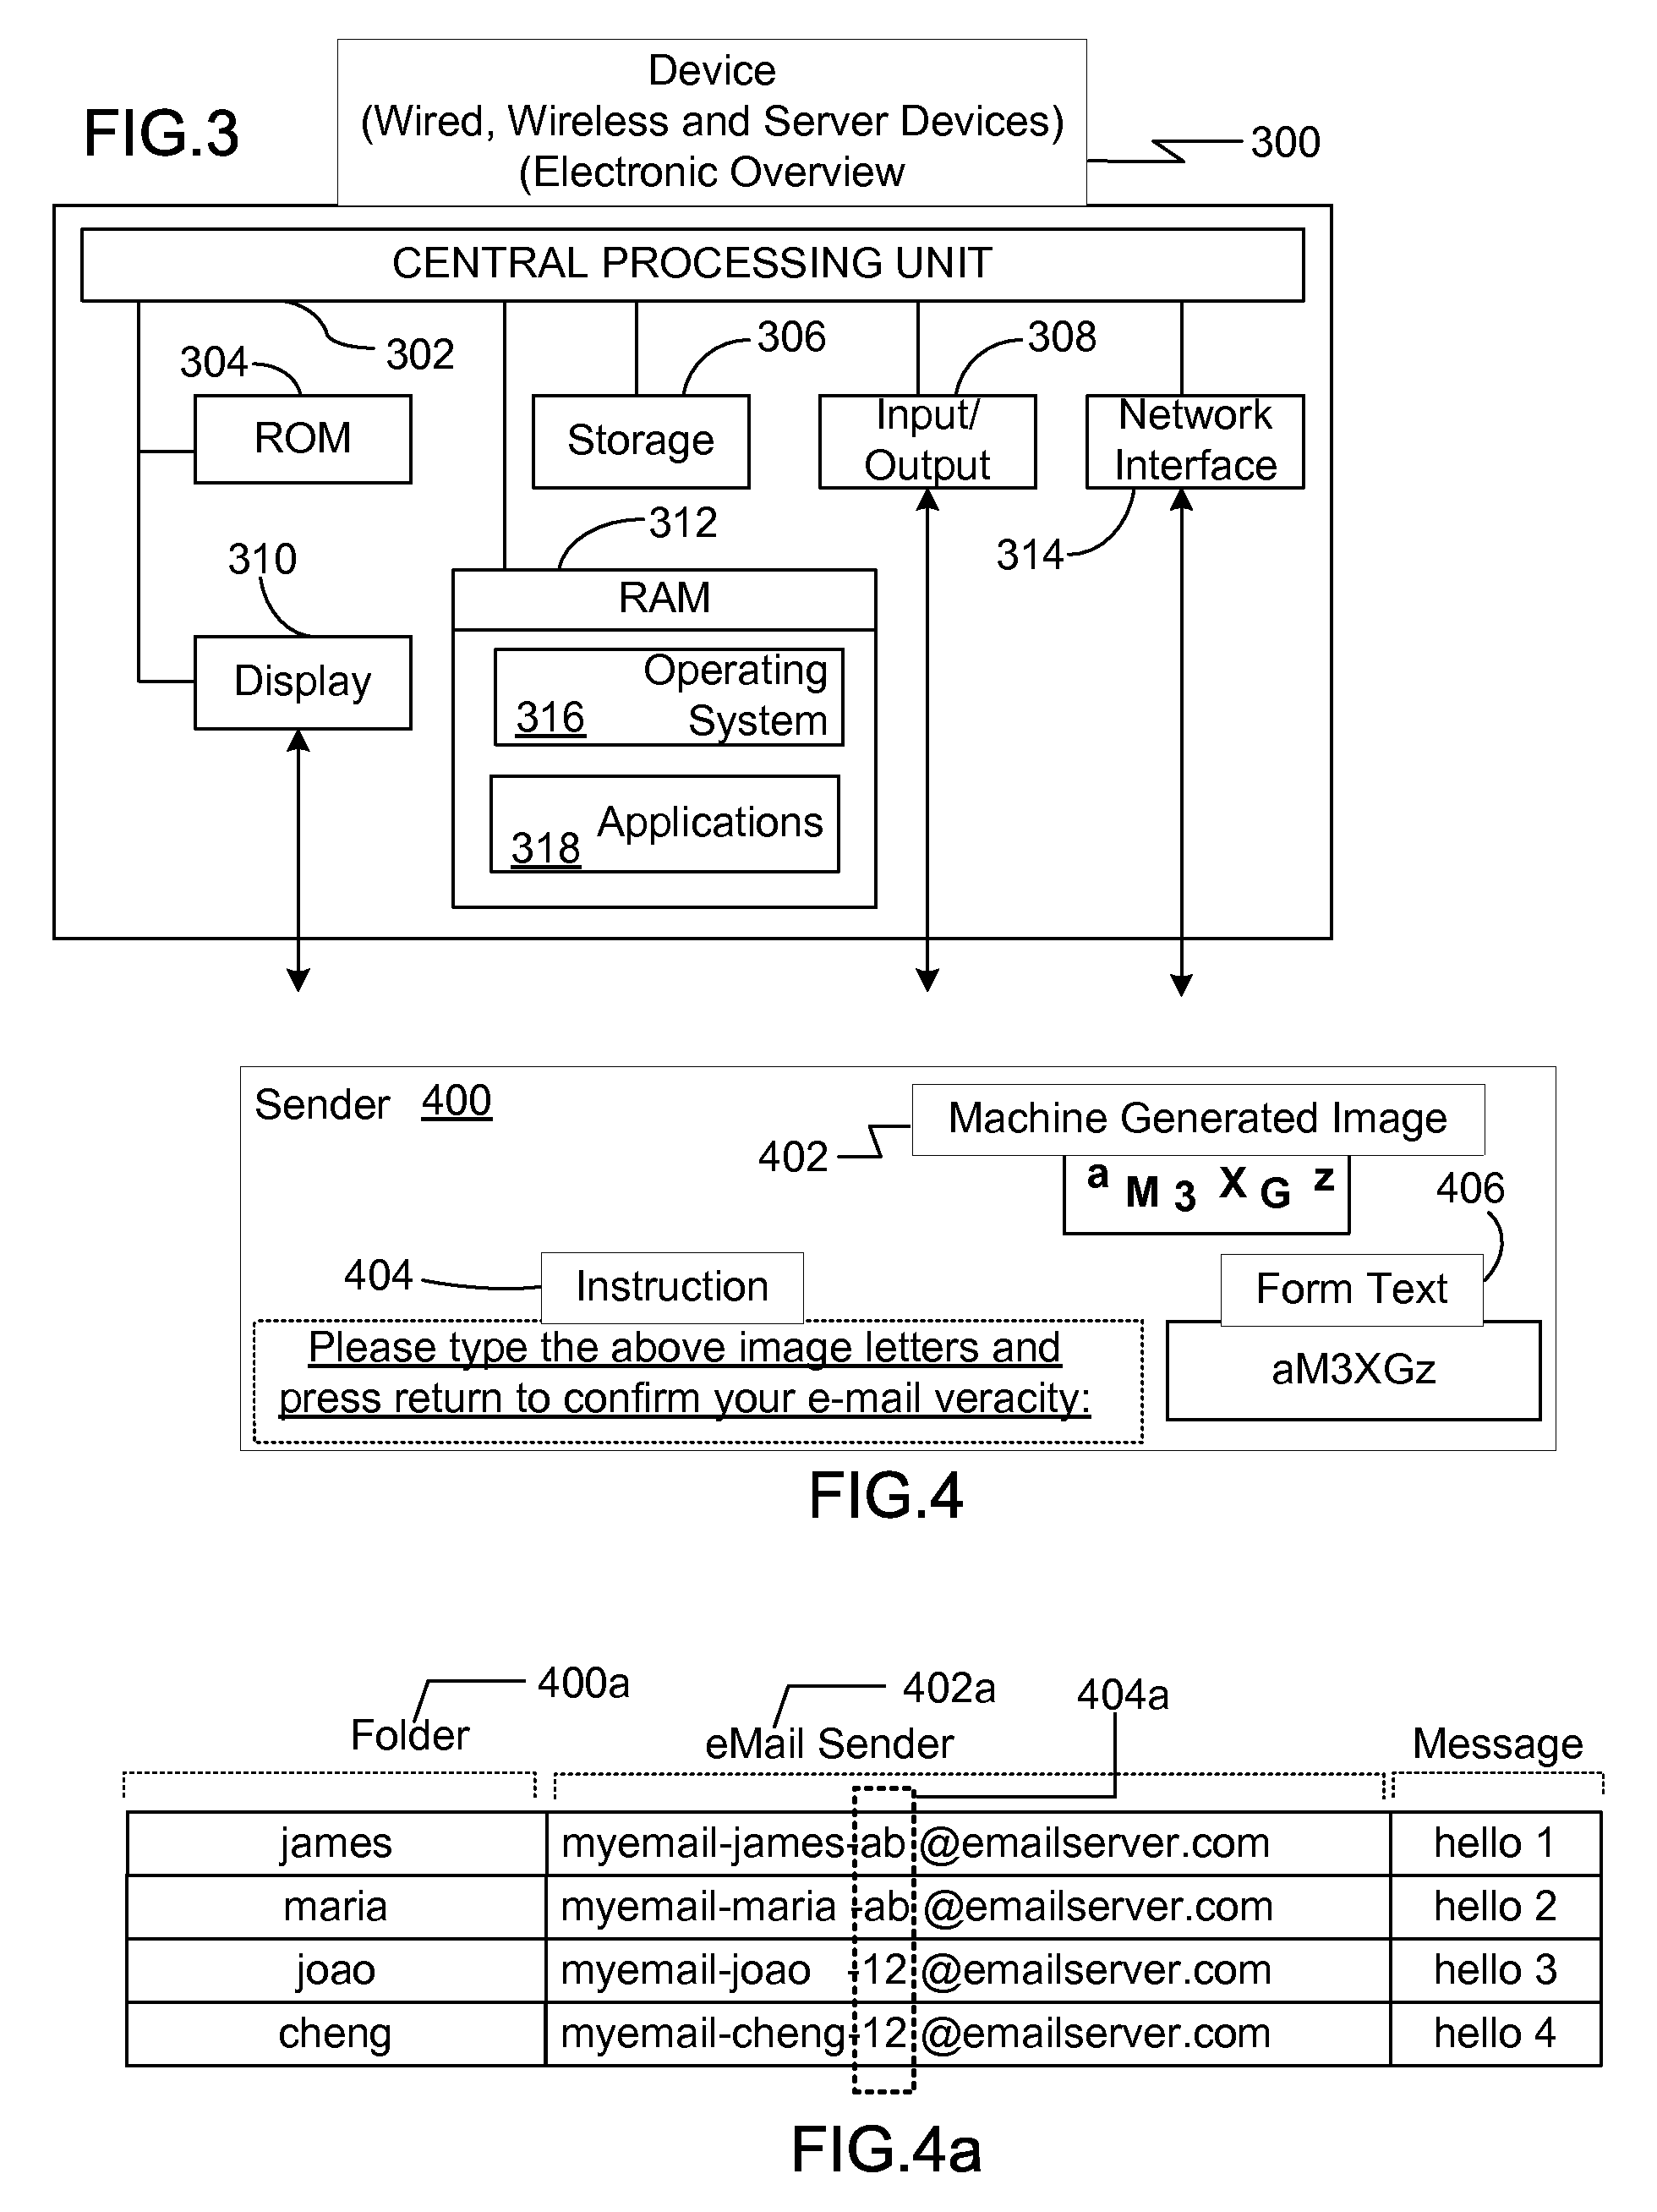 Virtual email method for preventing delivery of undesired electronic messages